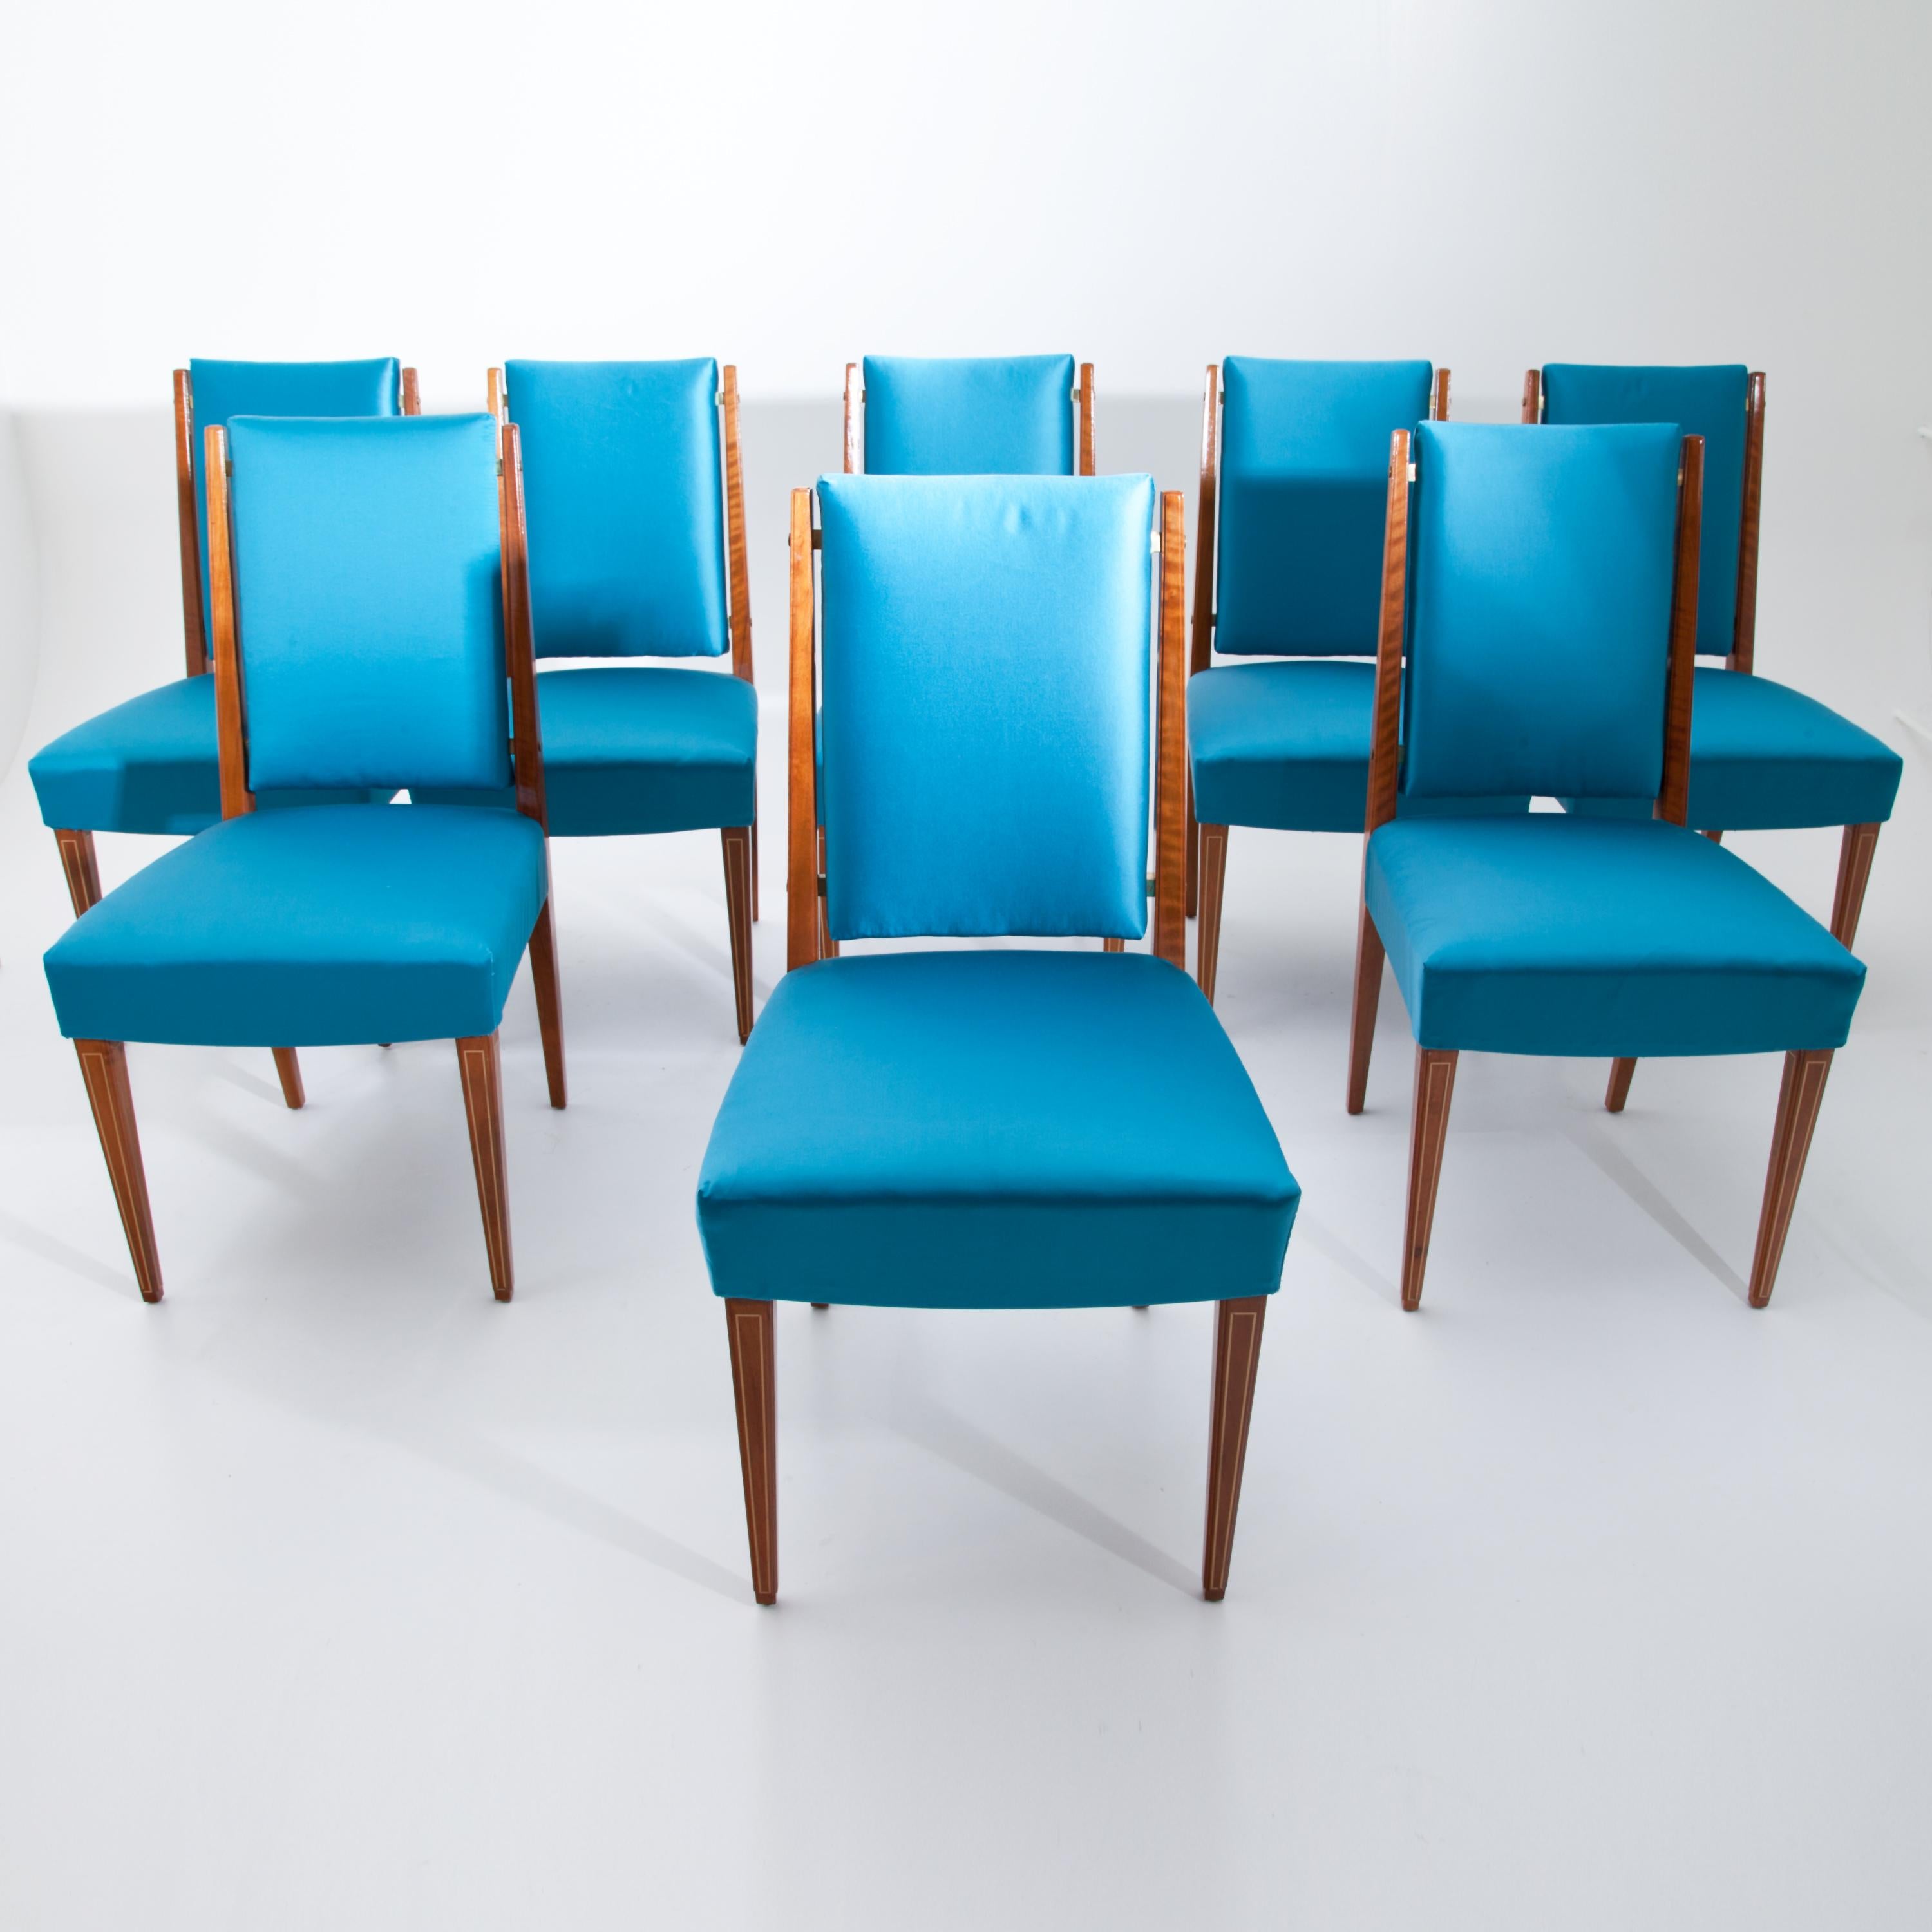 Set of eight dining room chairs with upholstered seats and backrests. The square pointed feet at the front are inlaid with brass threads. Very good, restored condition. The chairs were also newly covered with a high-quality blue fabric.